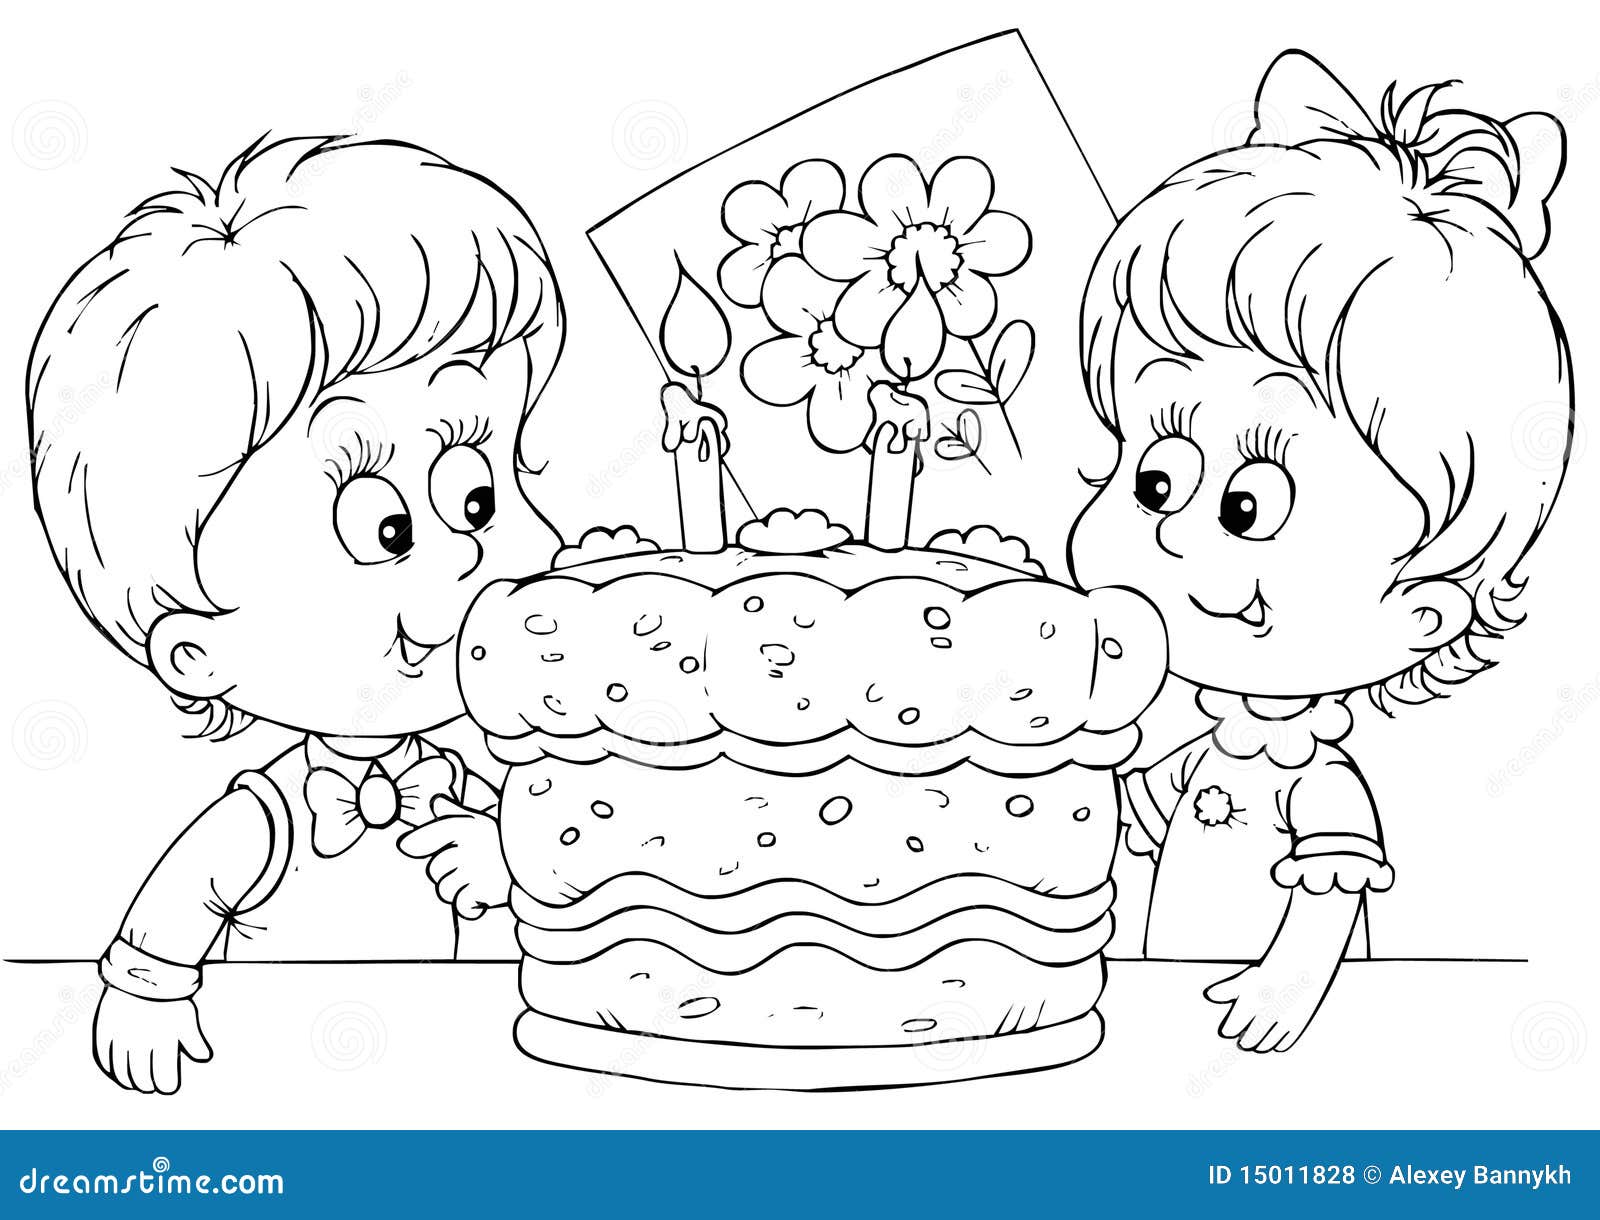 cake coloring pages with congratulations - photo #17